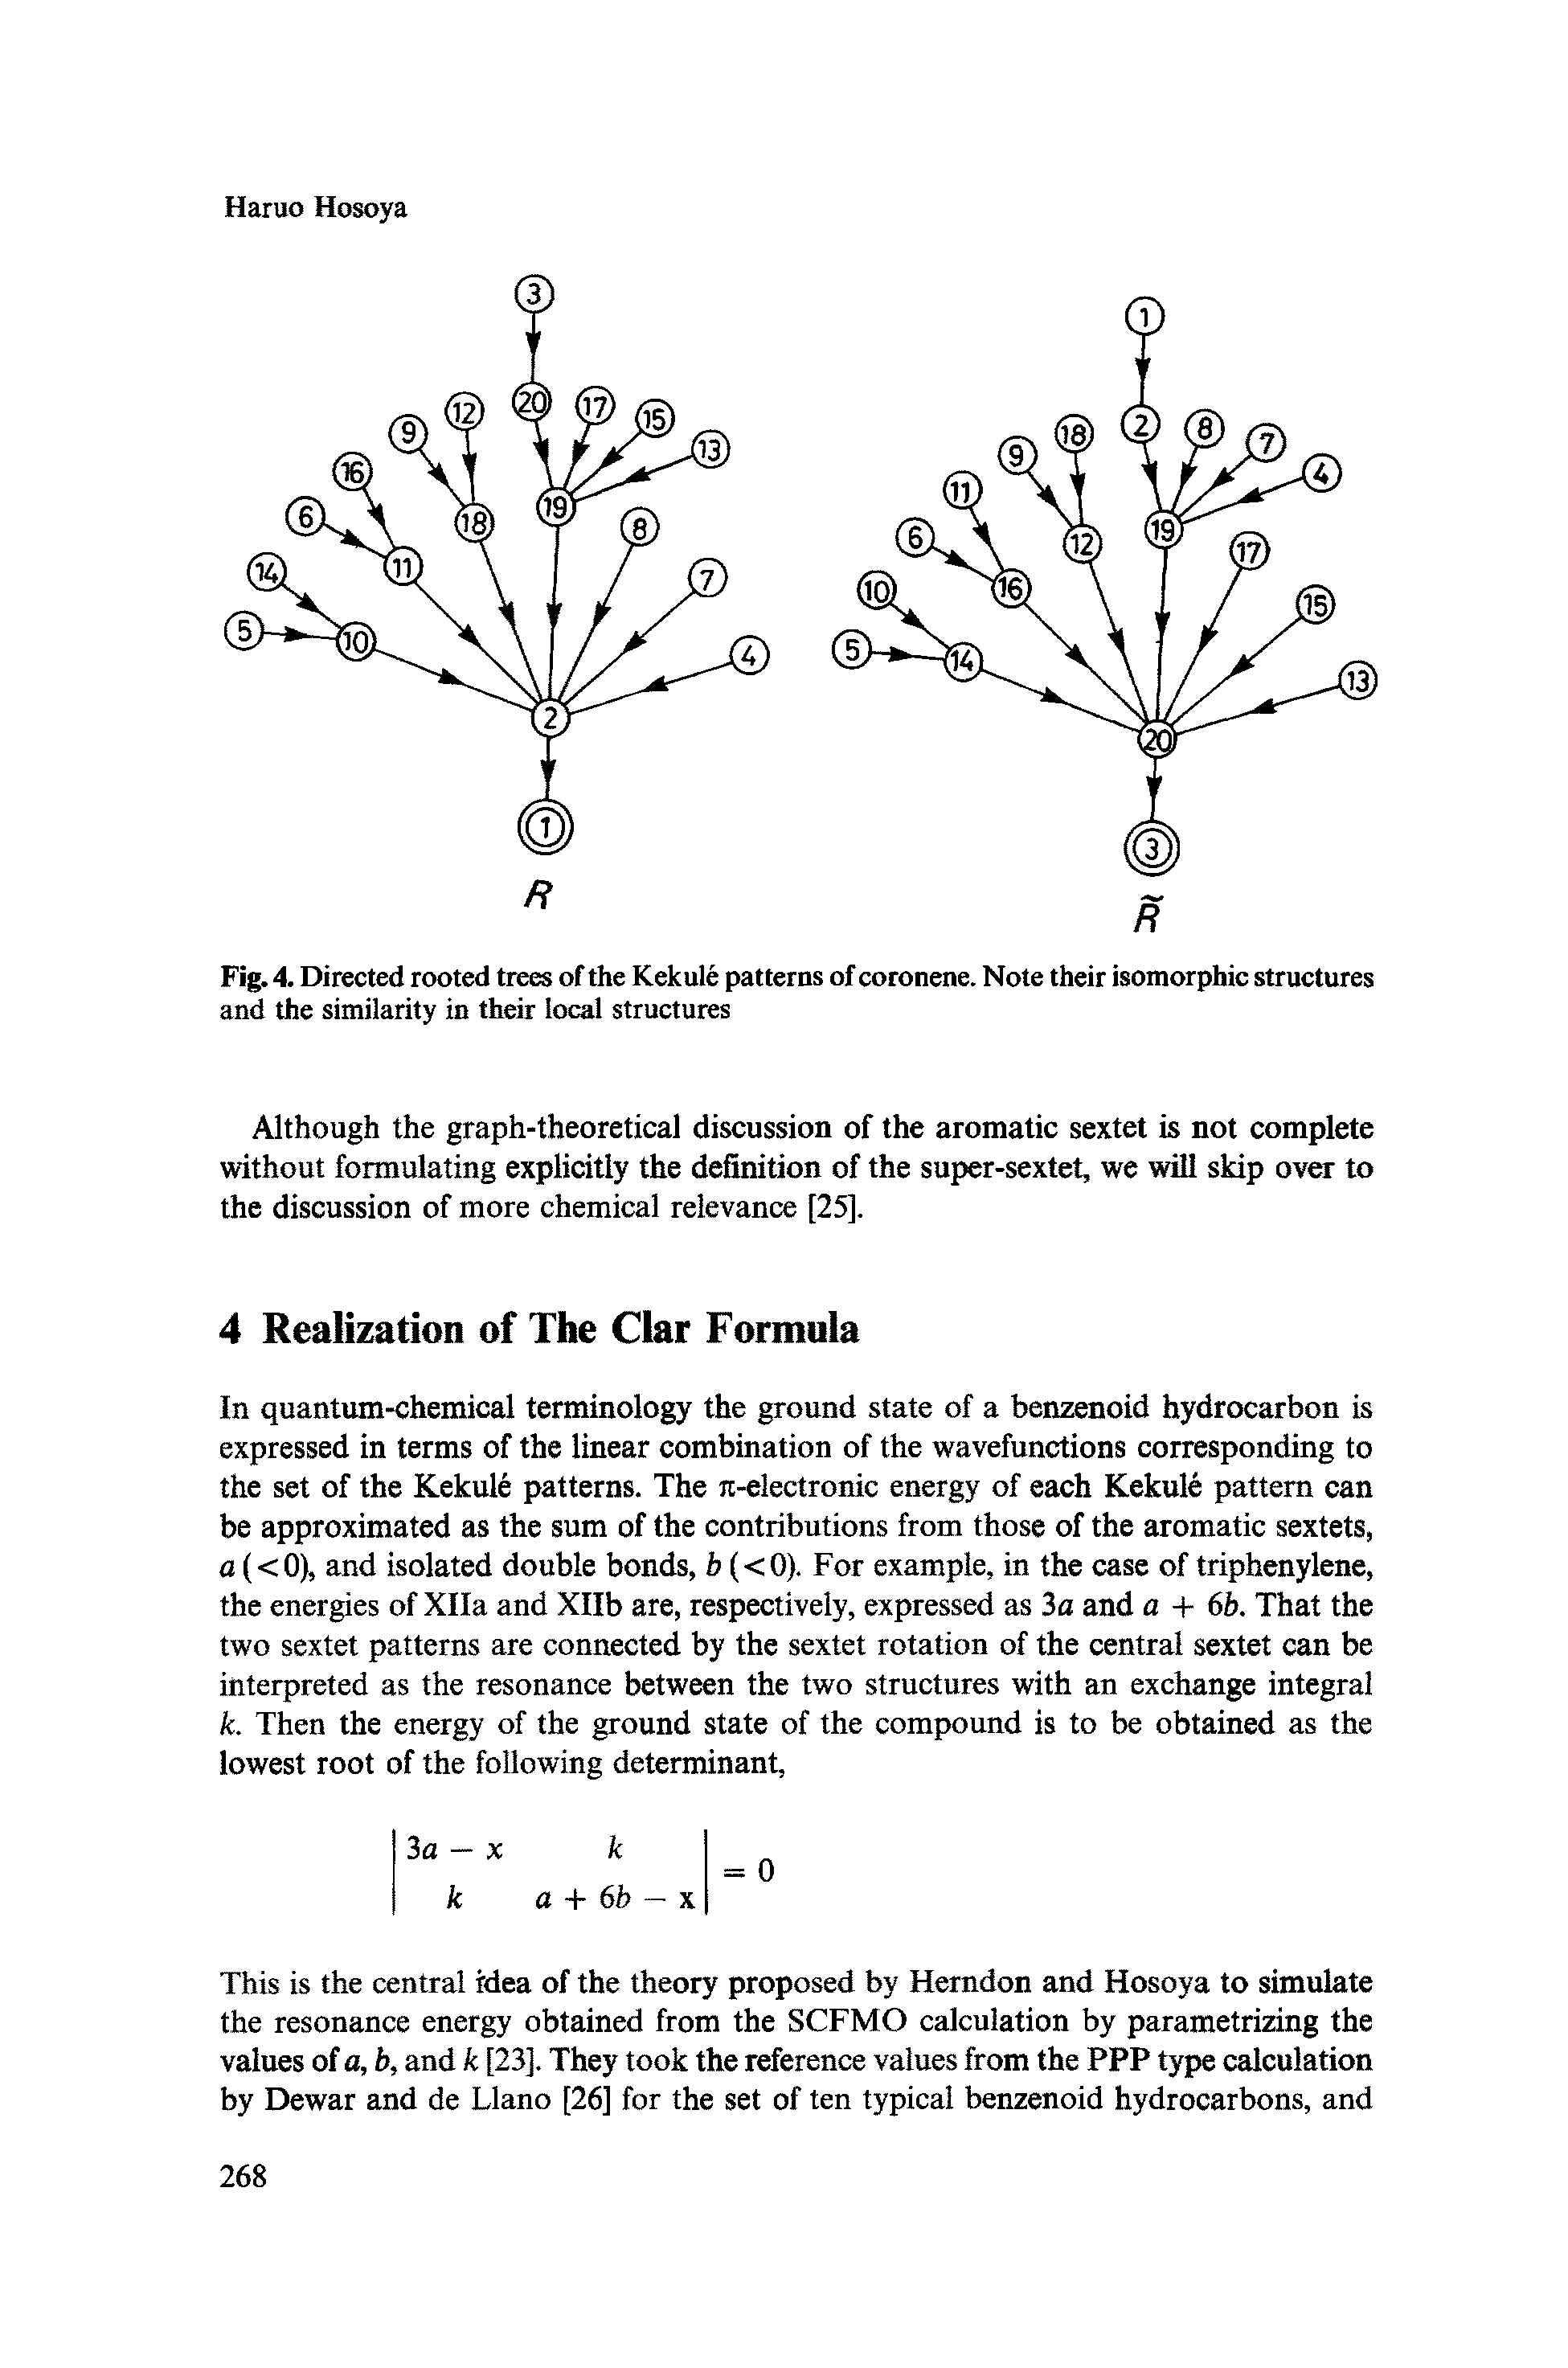 Fig. 4. Directed rooted trees of the Kekule patterns of coronene. Note their isomorphic structures and the similarity in their local structures...